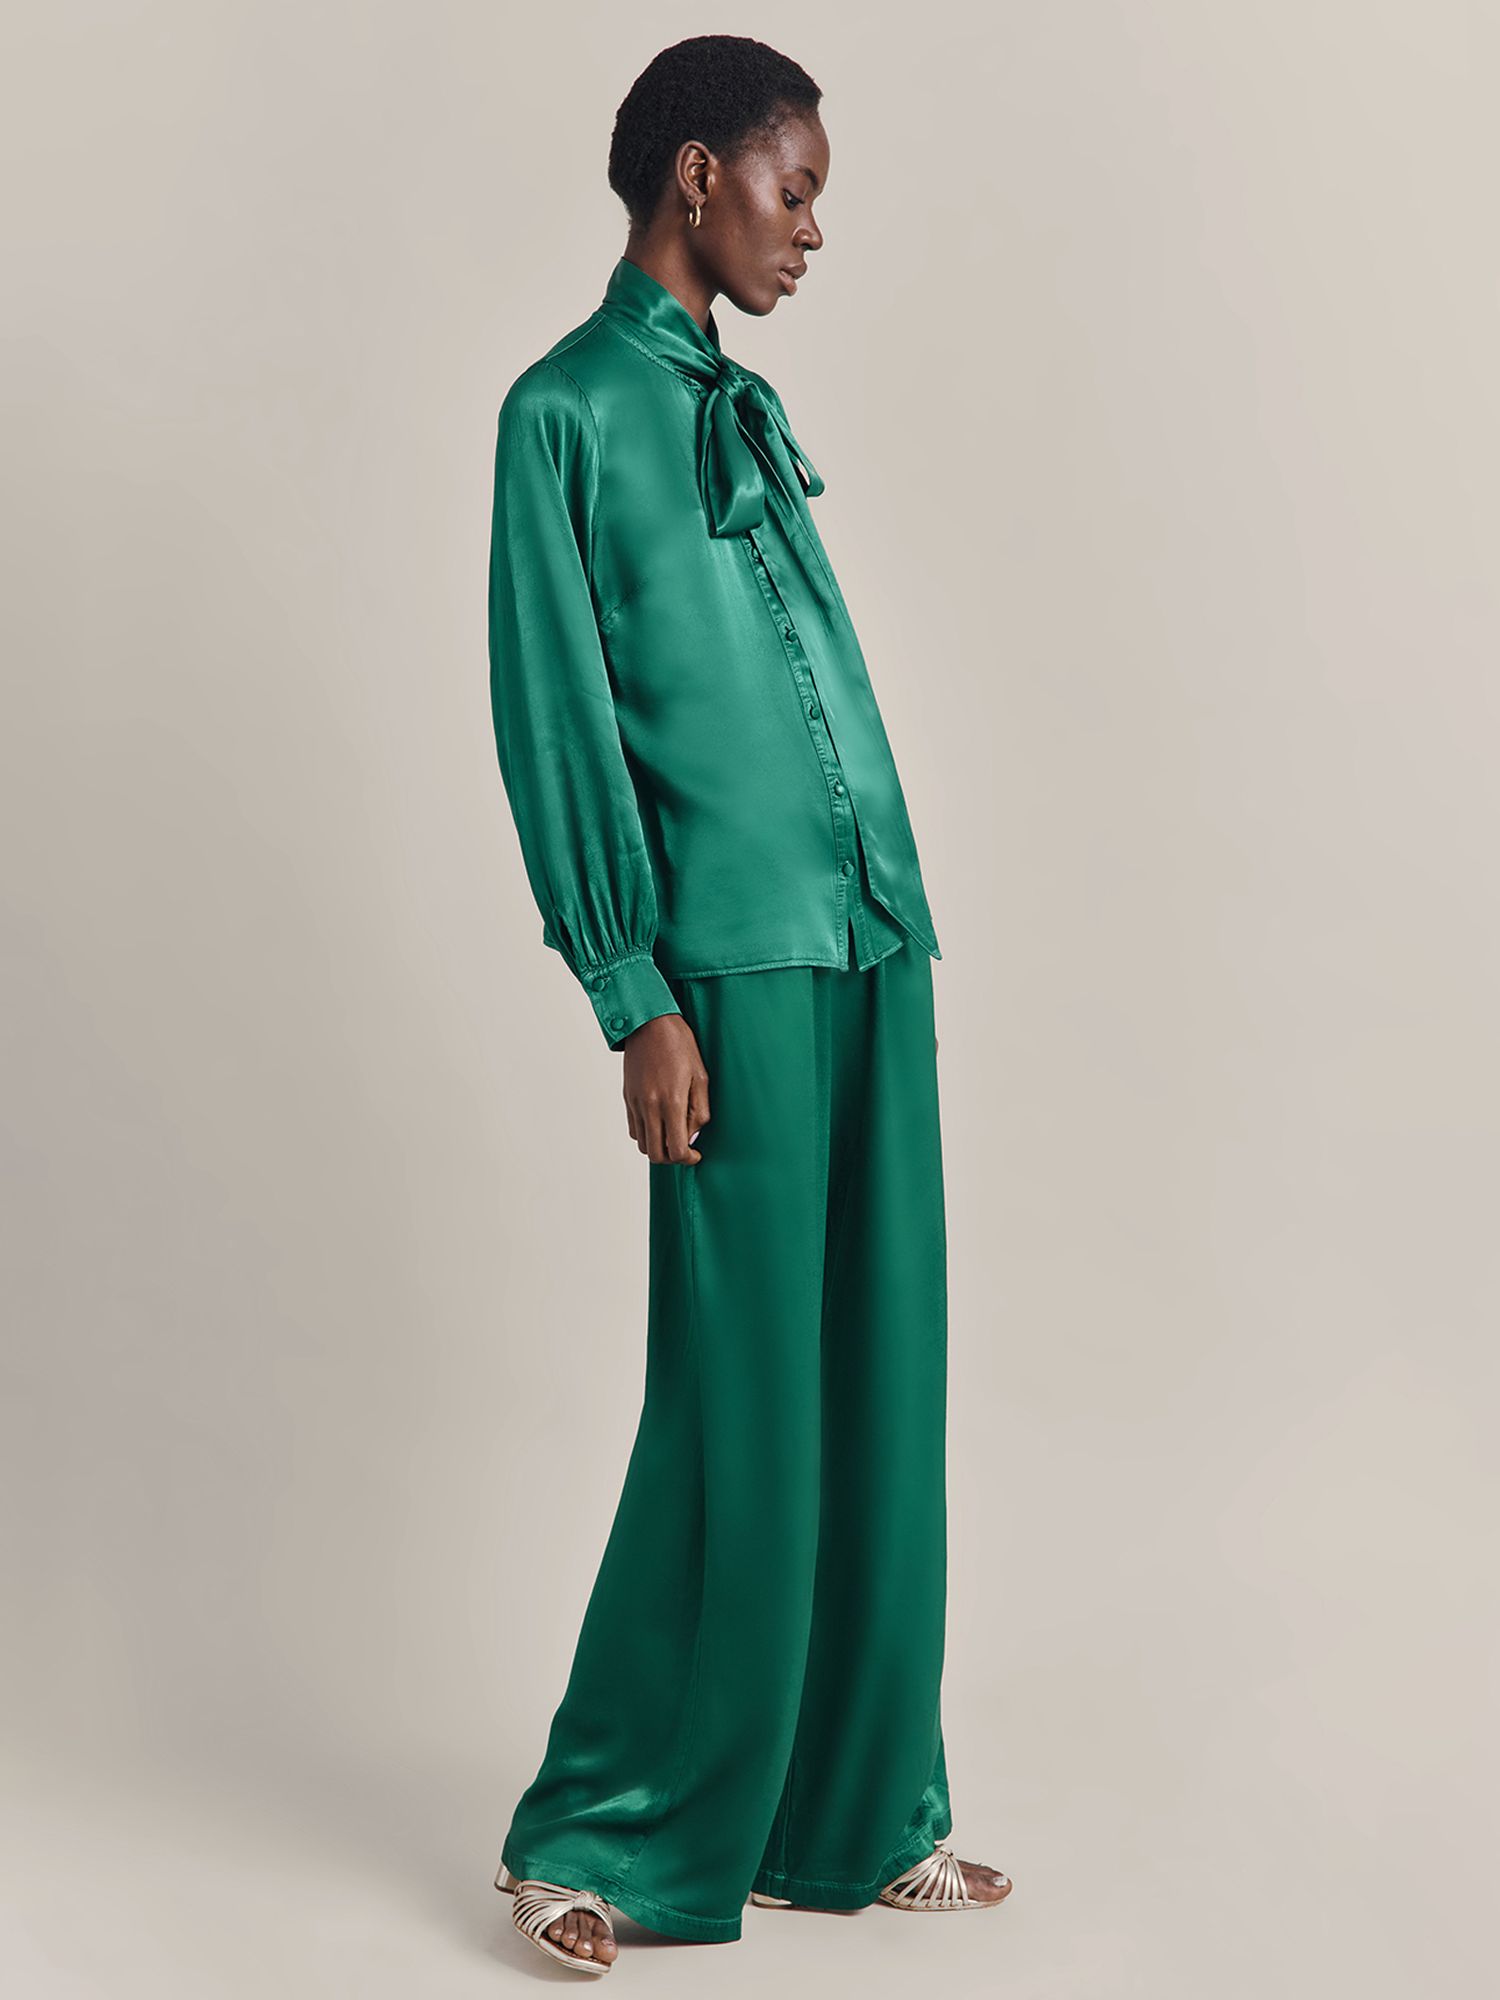 Buy Ghost Sylvia Satin Trouser, Green Online at johnlewis.com